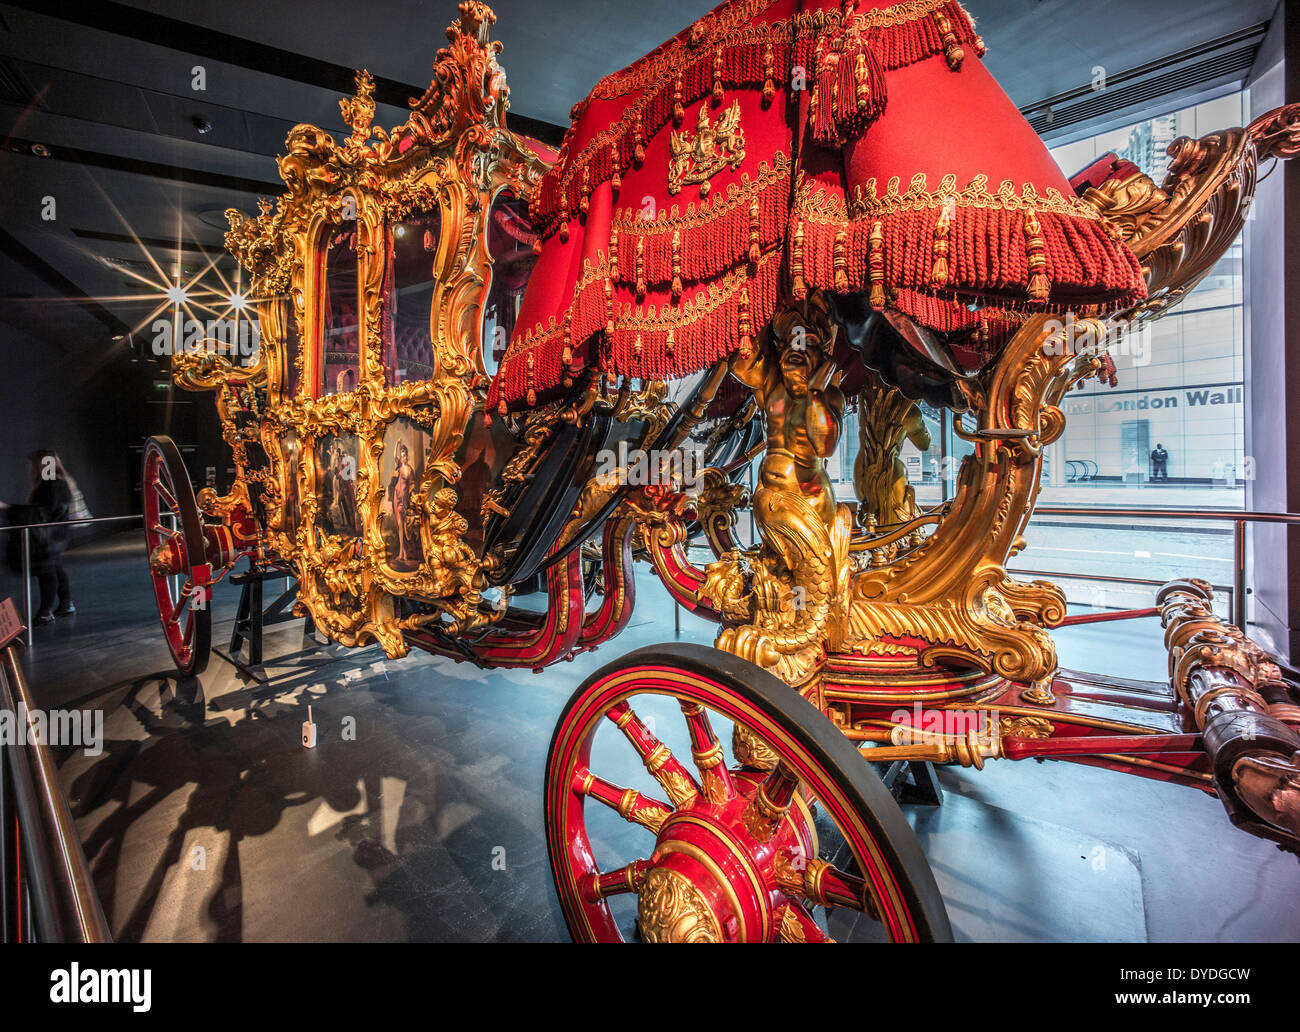 Lord Mayor of London staatliche Trainer in das Museum of London. Stockfoto